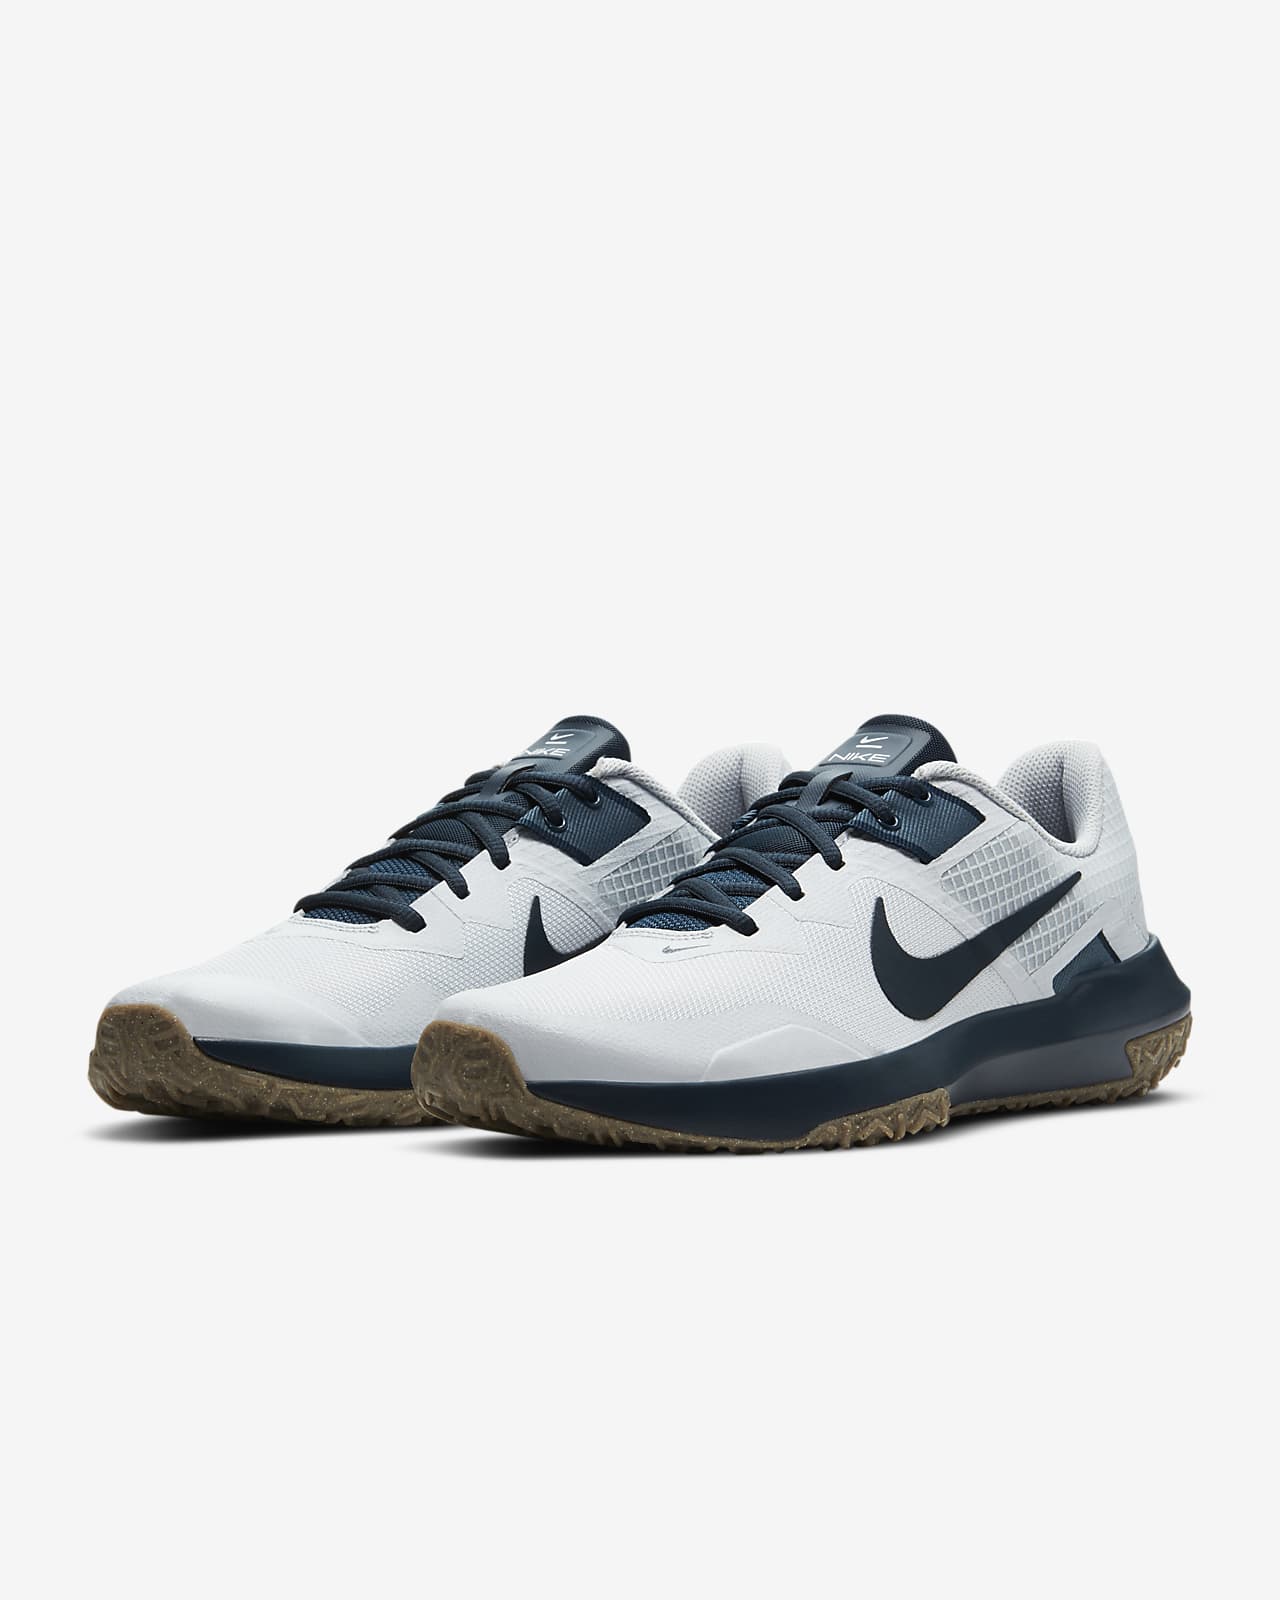 nike varsity compete tr 2 shoes